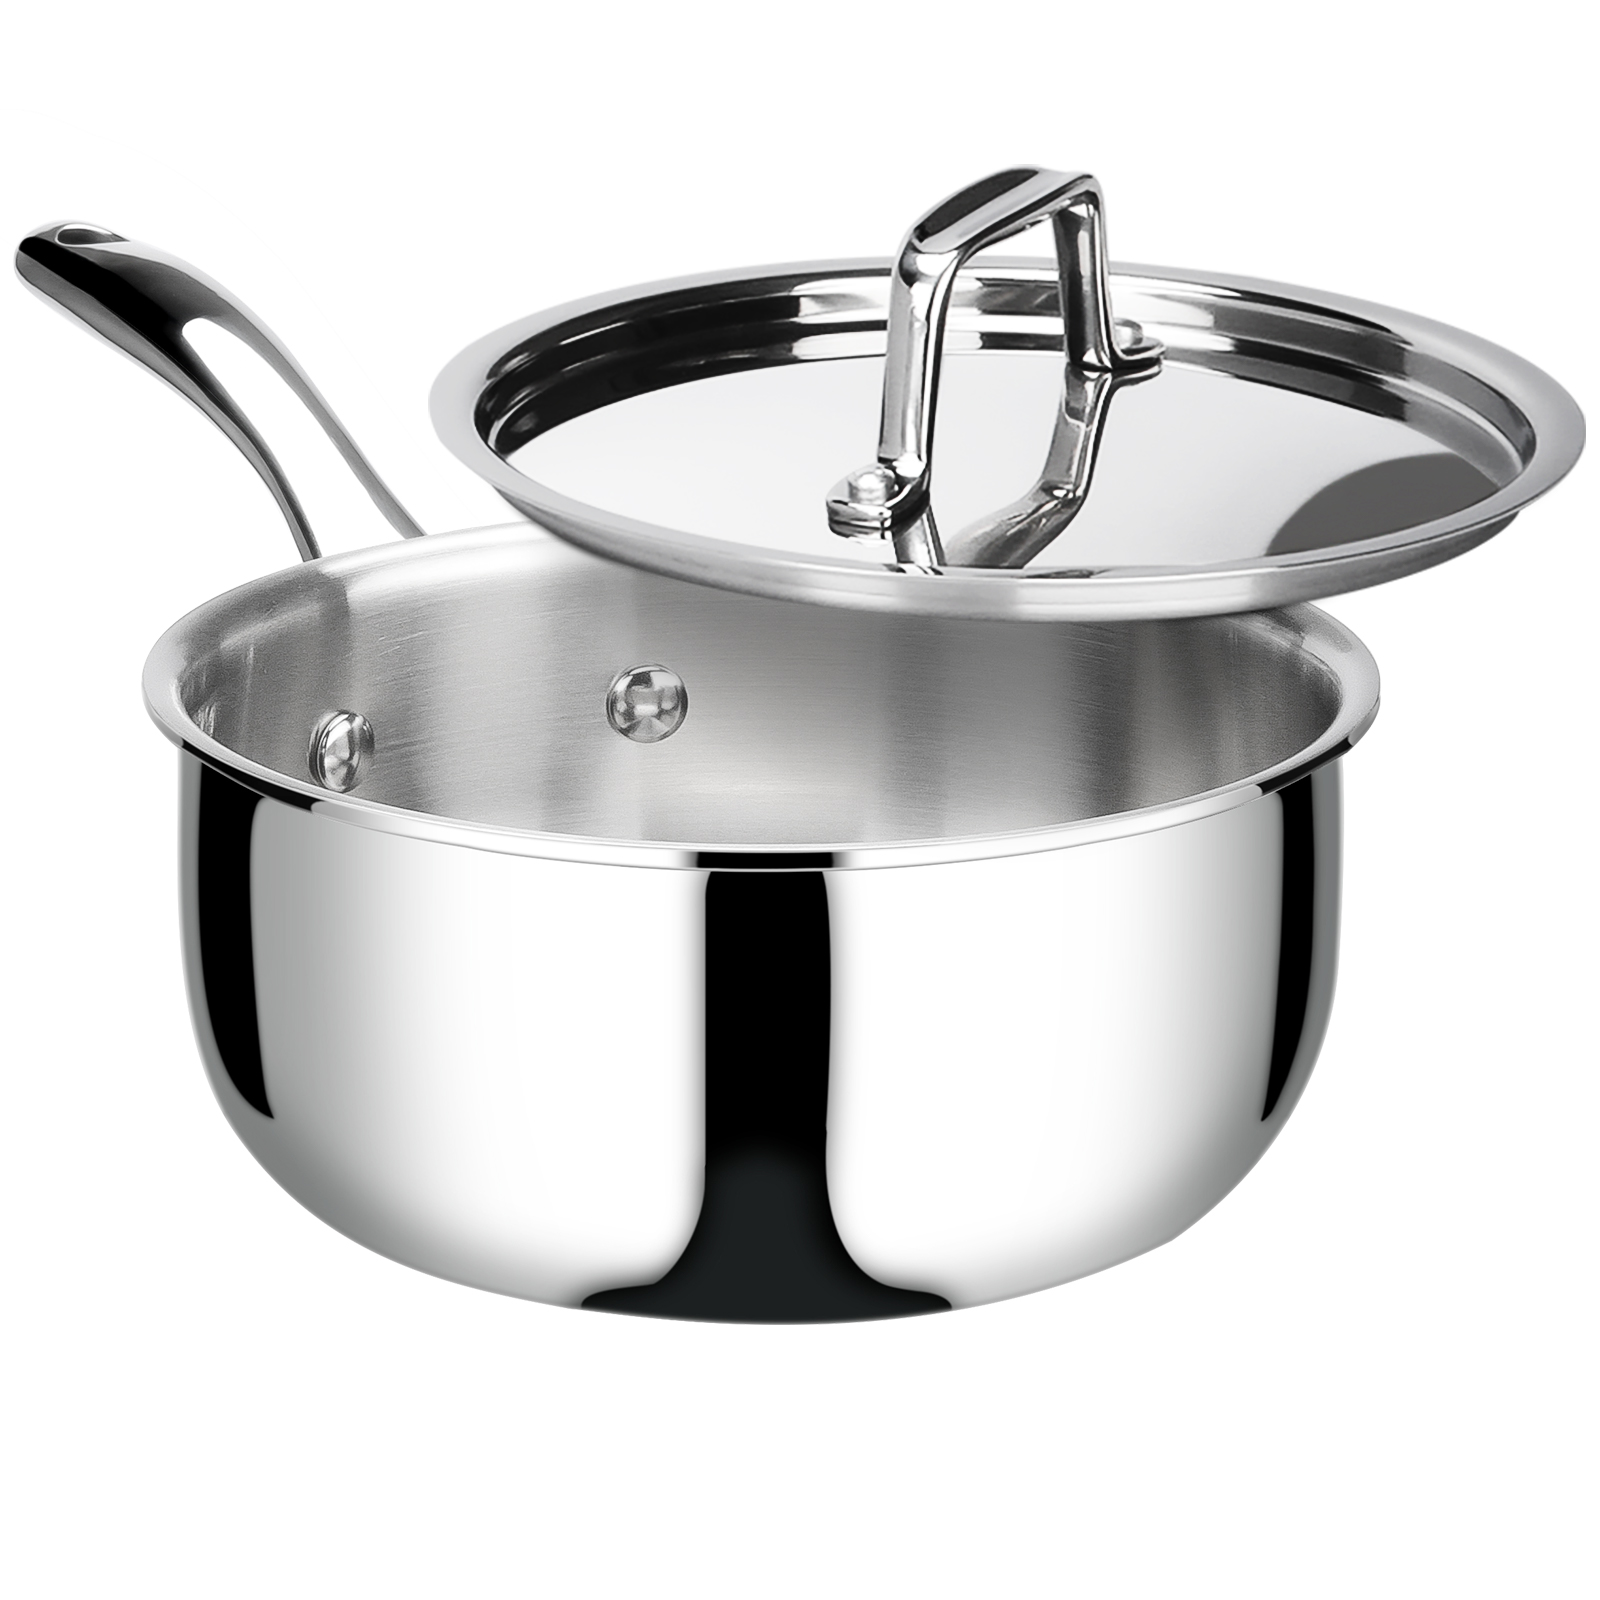 Cook N Home Stainless Steel Saucepan 3 Quart, Tri-Ply Full Clad Sauce Pan  with Glass Lid, Silver 